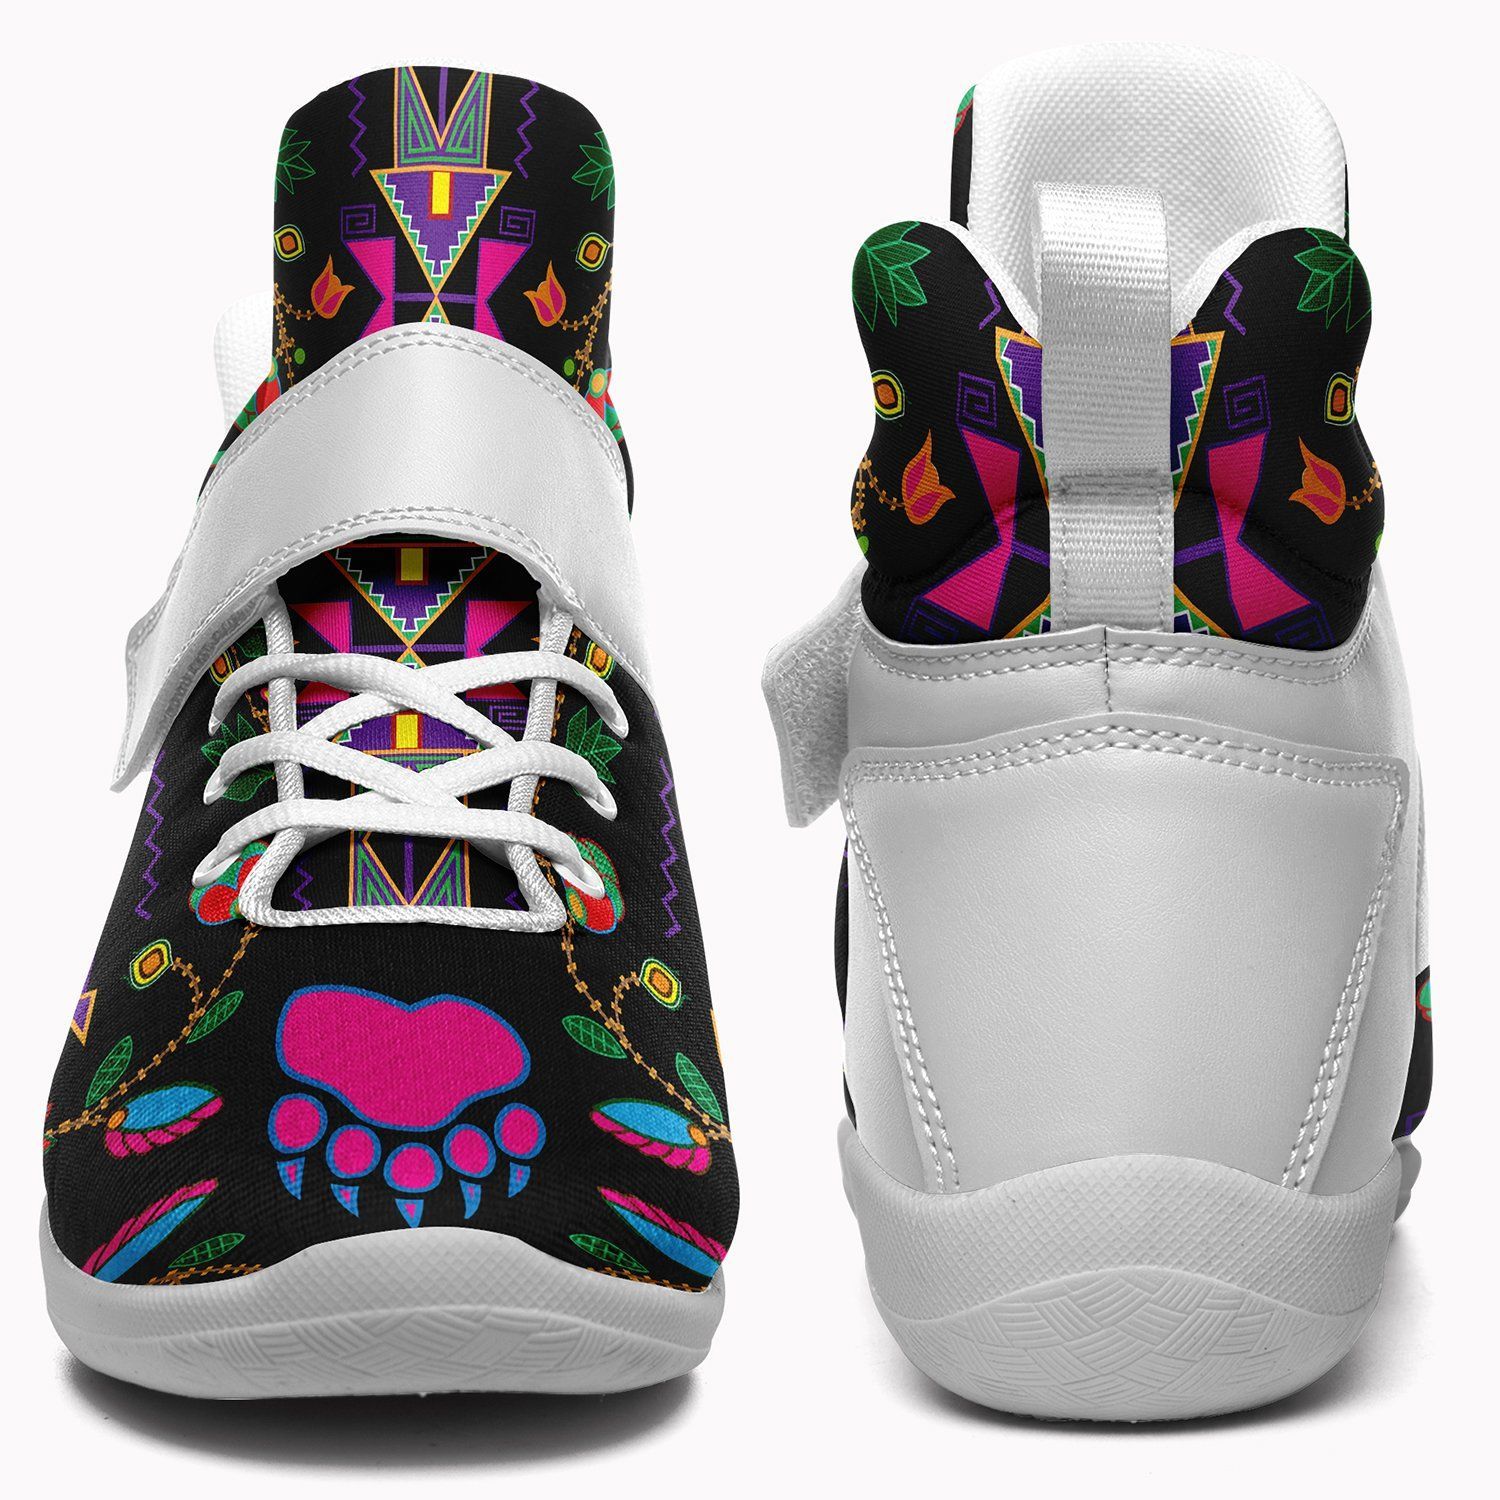 Geometric Floral Fall Black Ipottaa Basketball / Sport High Top Shoes - White Sole 49 Dzine 